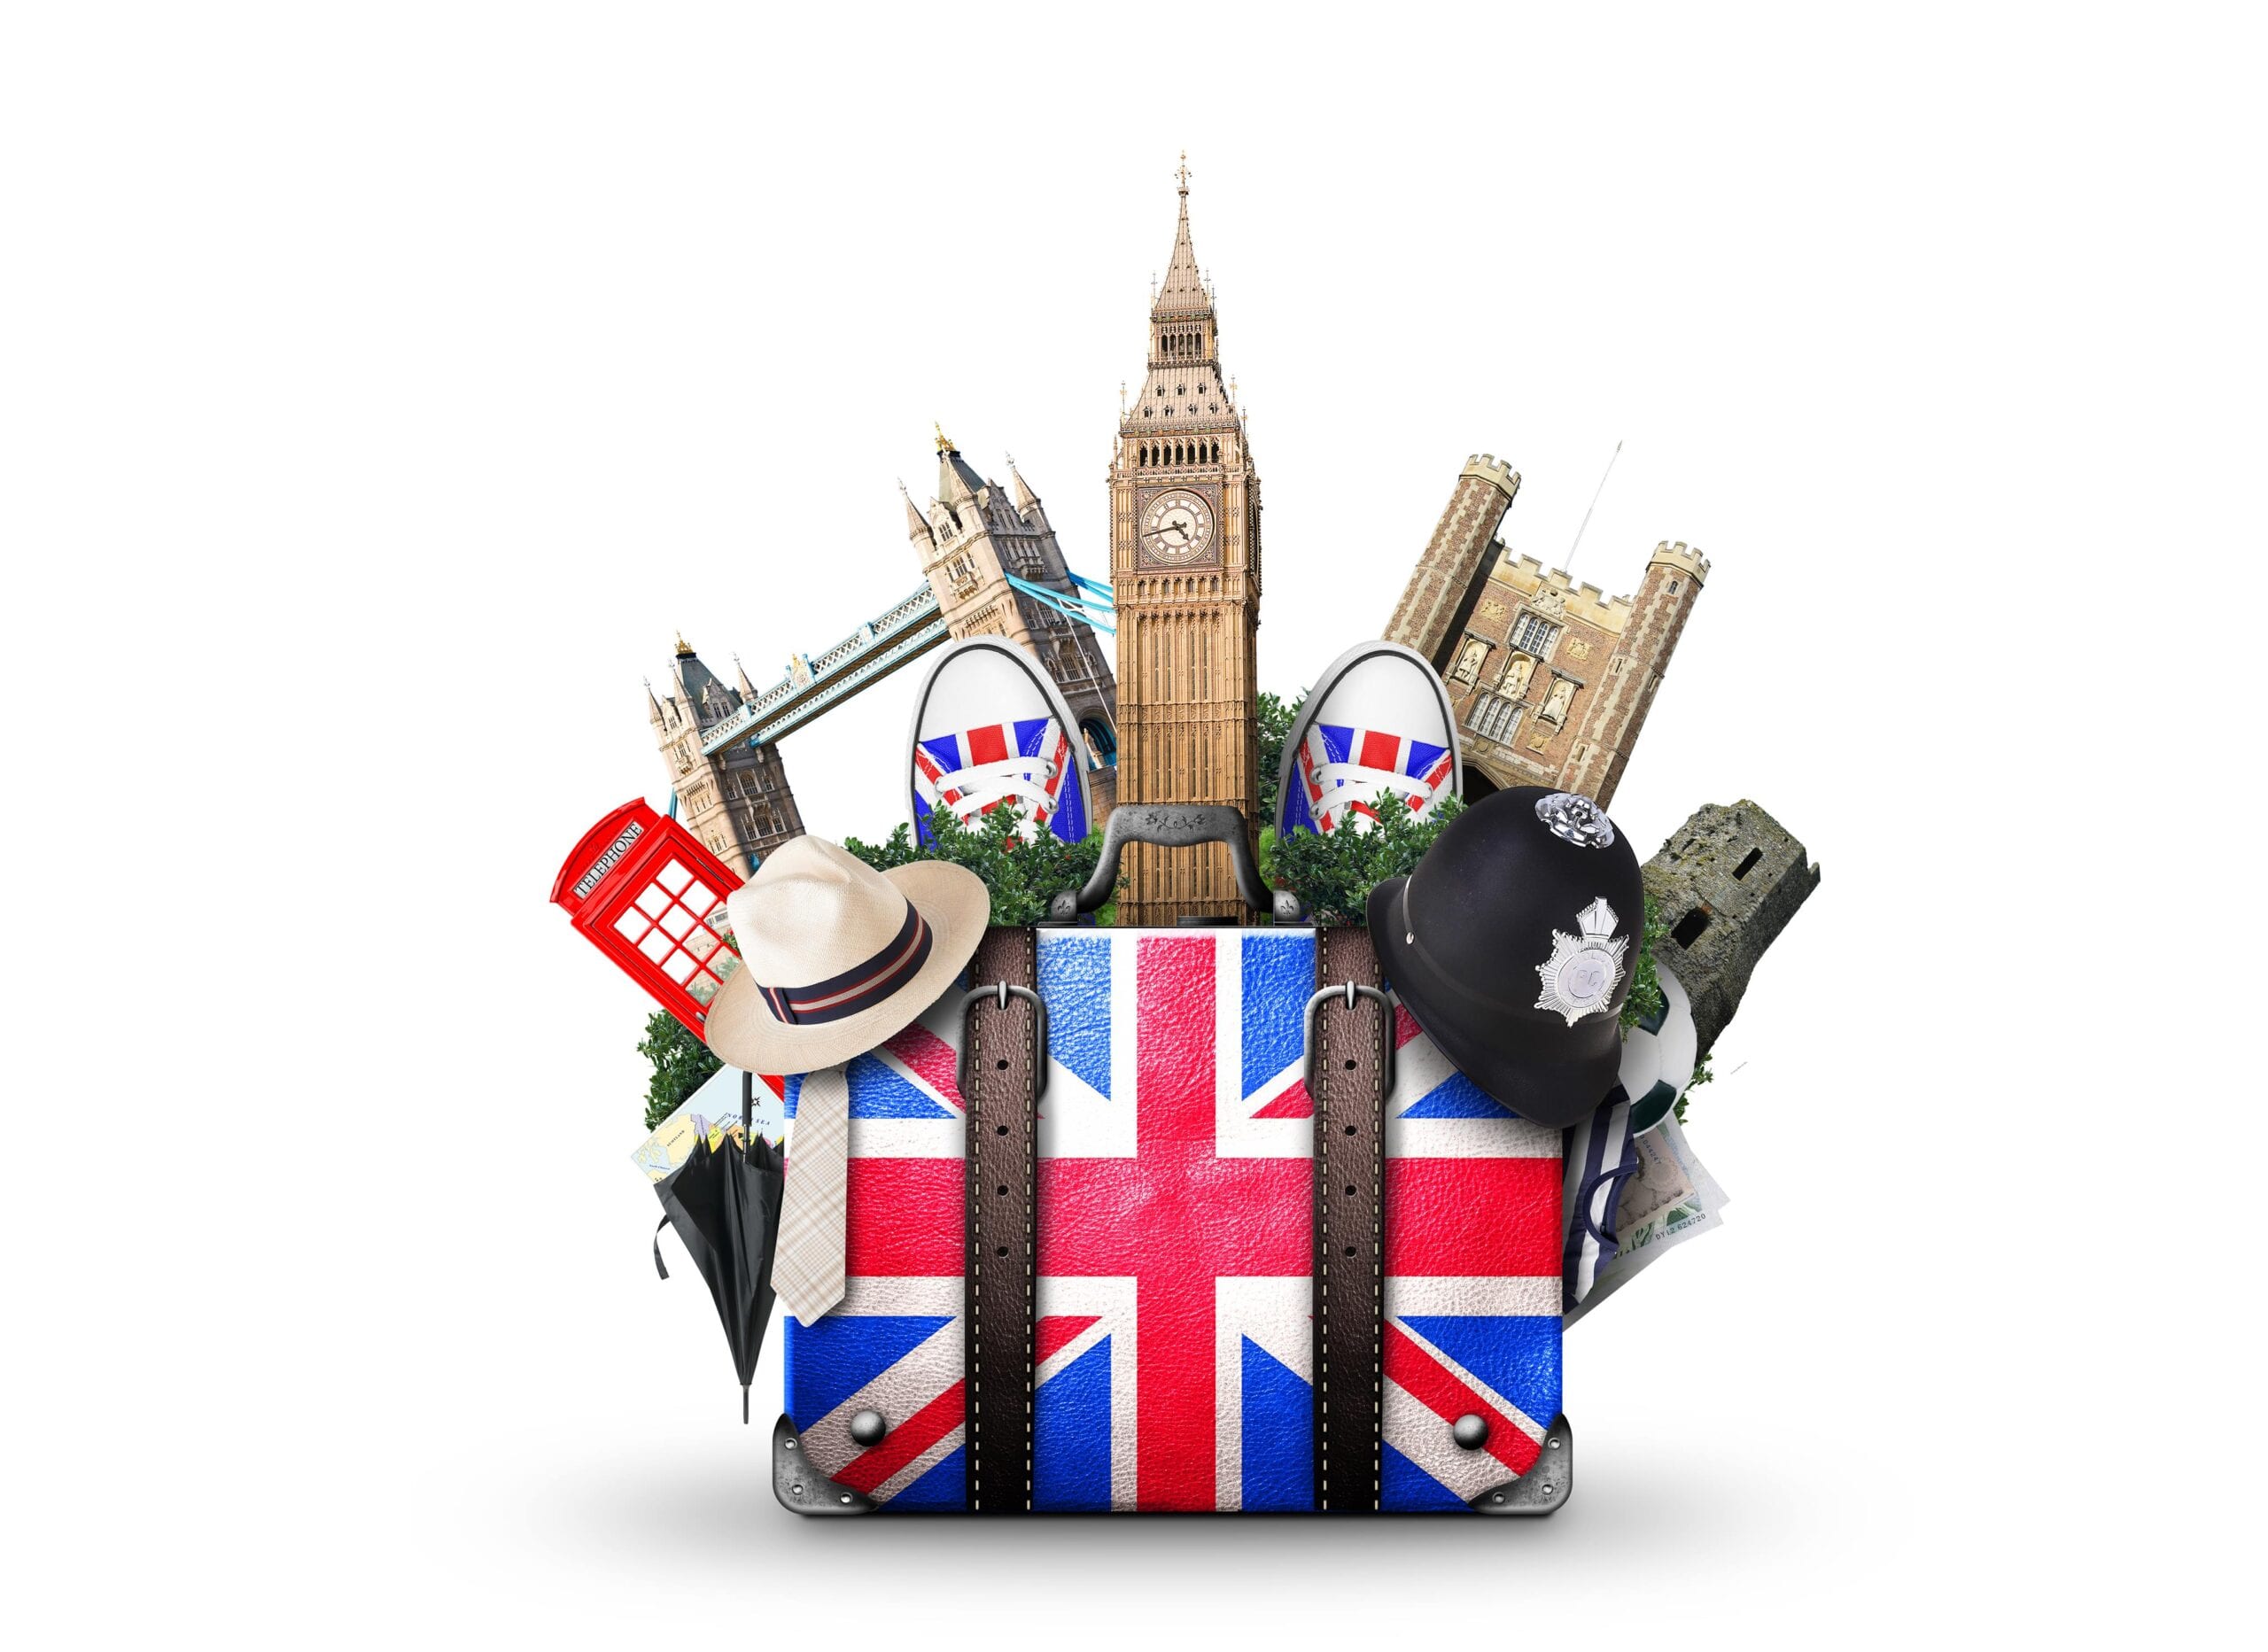 Image of a suitcase with England flag and England landmarks in the background